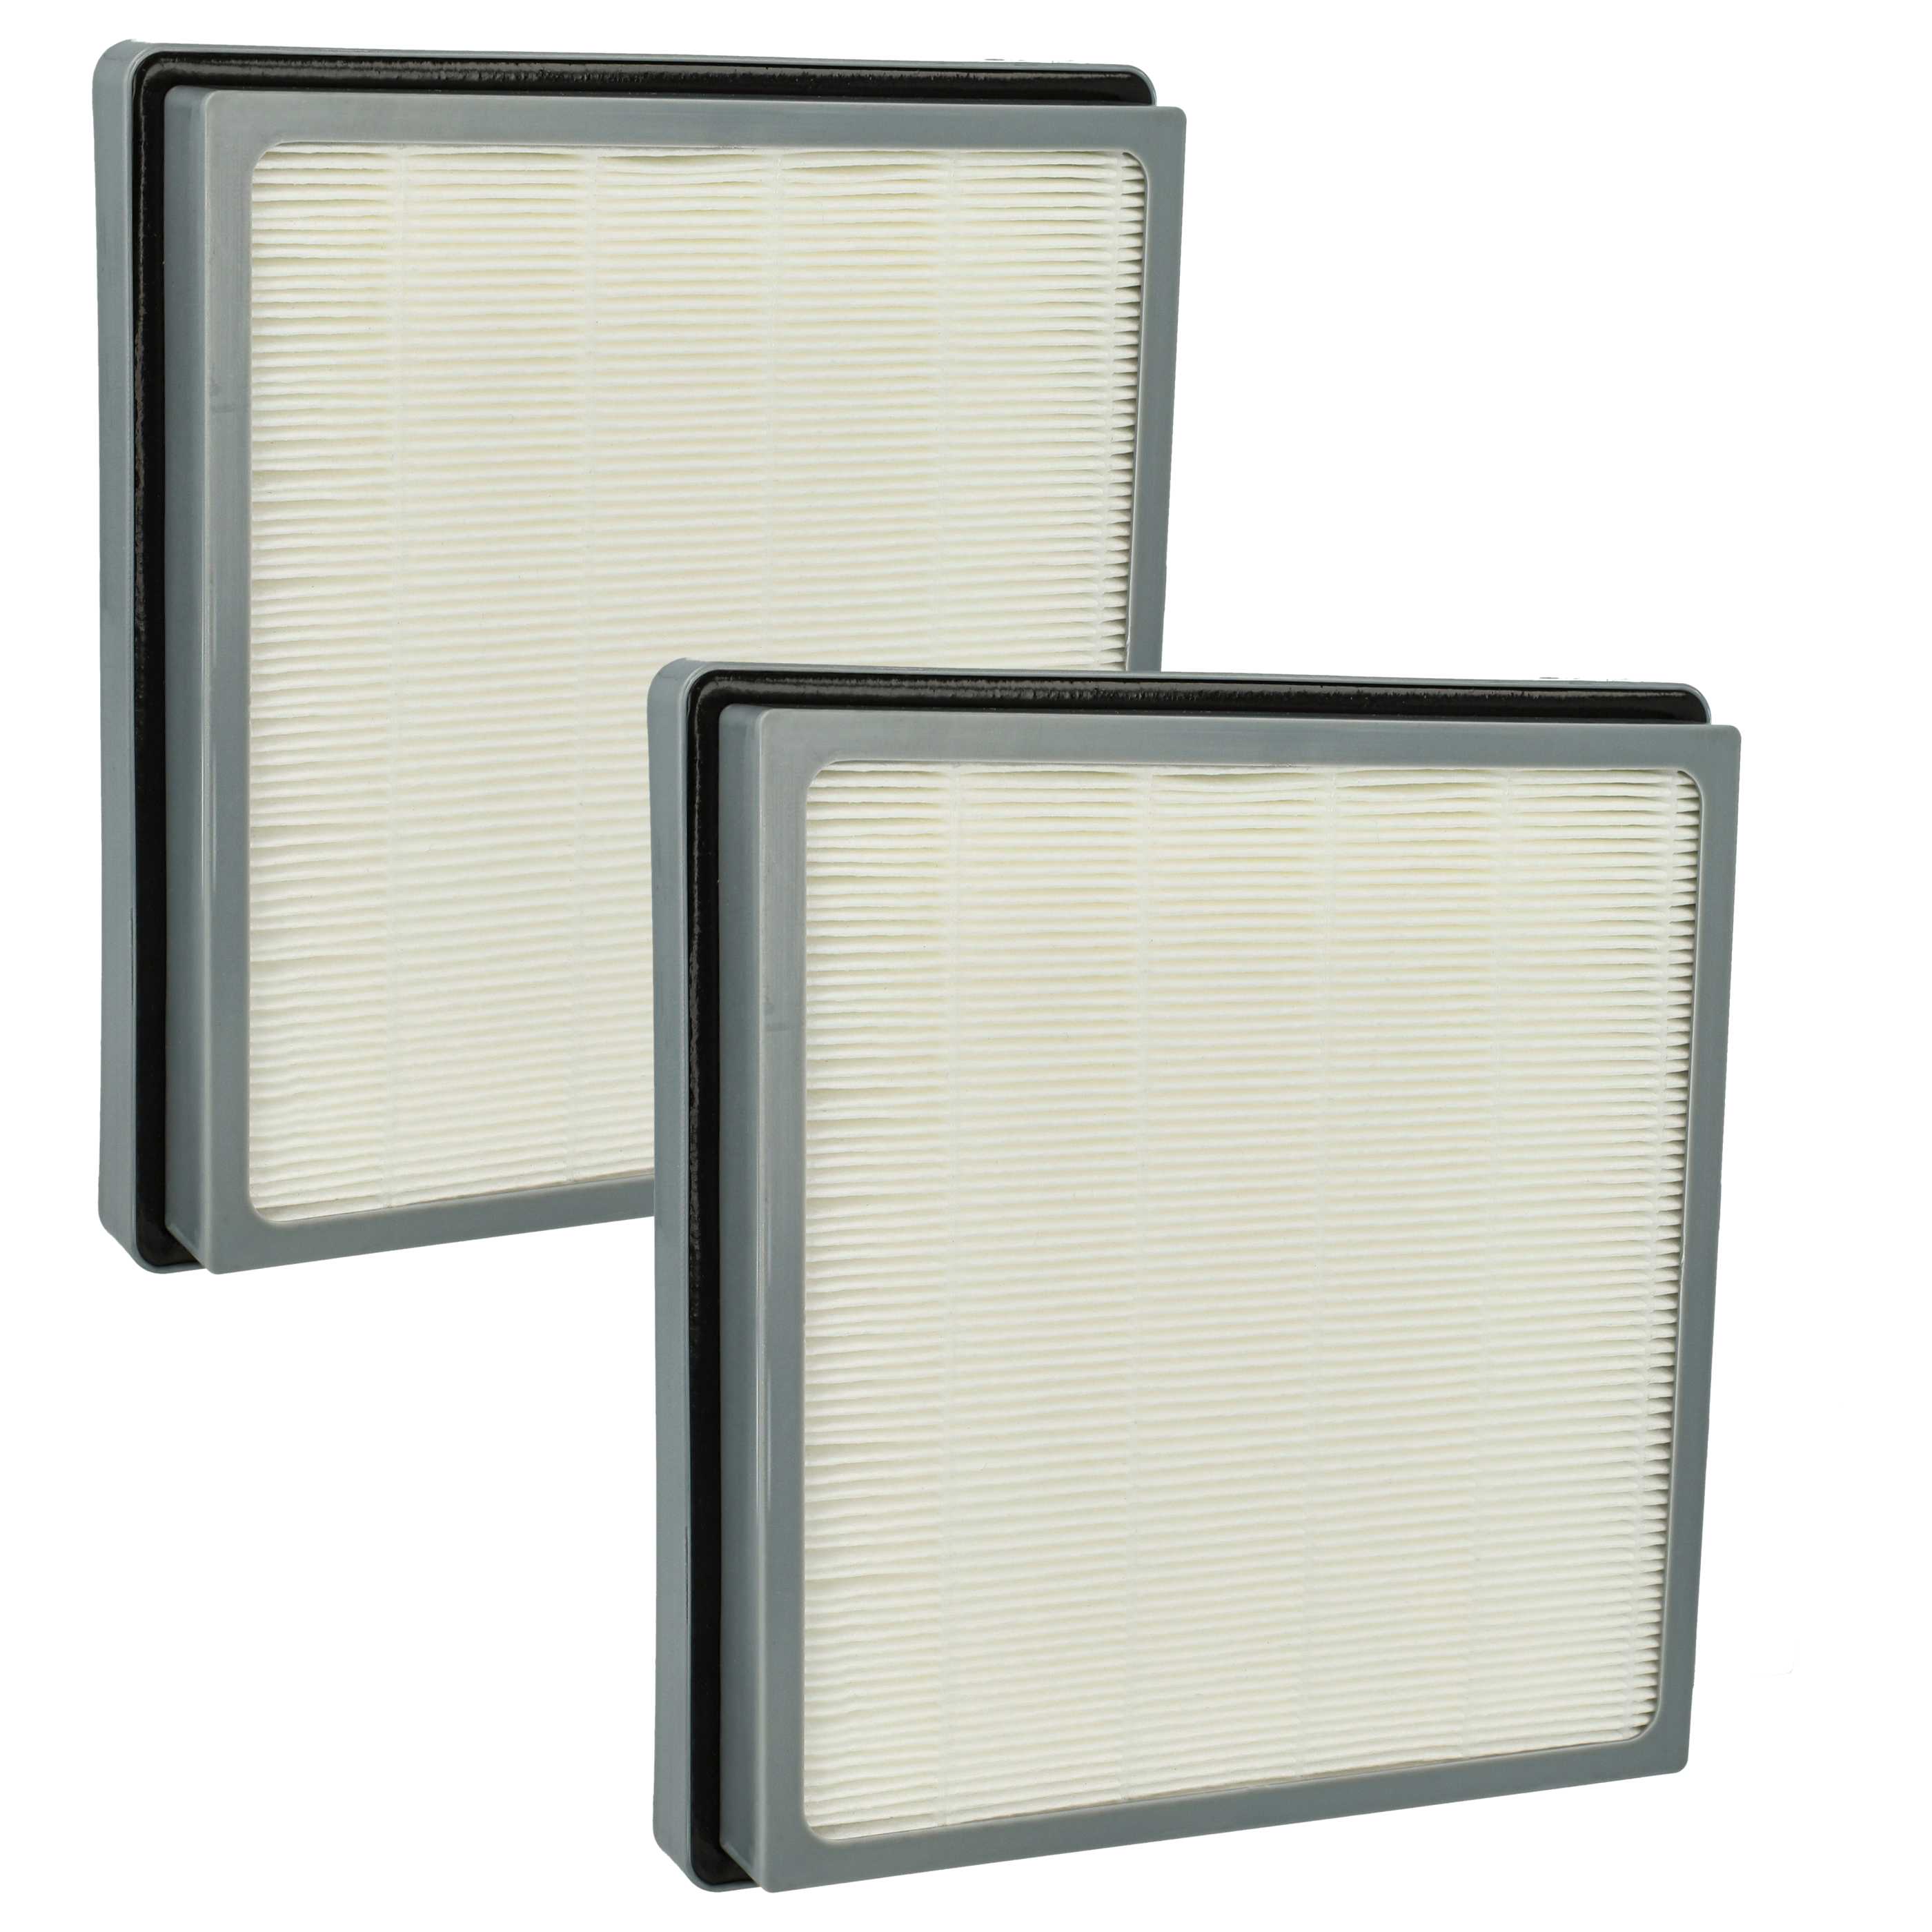 2x HEPA exhaust filter replaces Nilfisk 12015500 for NilfiskVacuum Cleaner